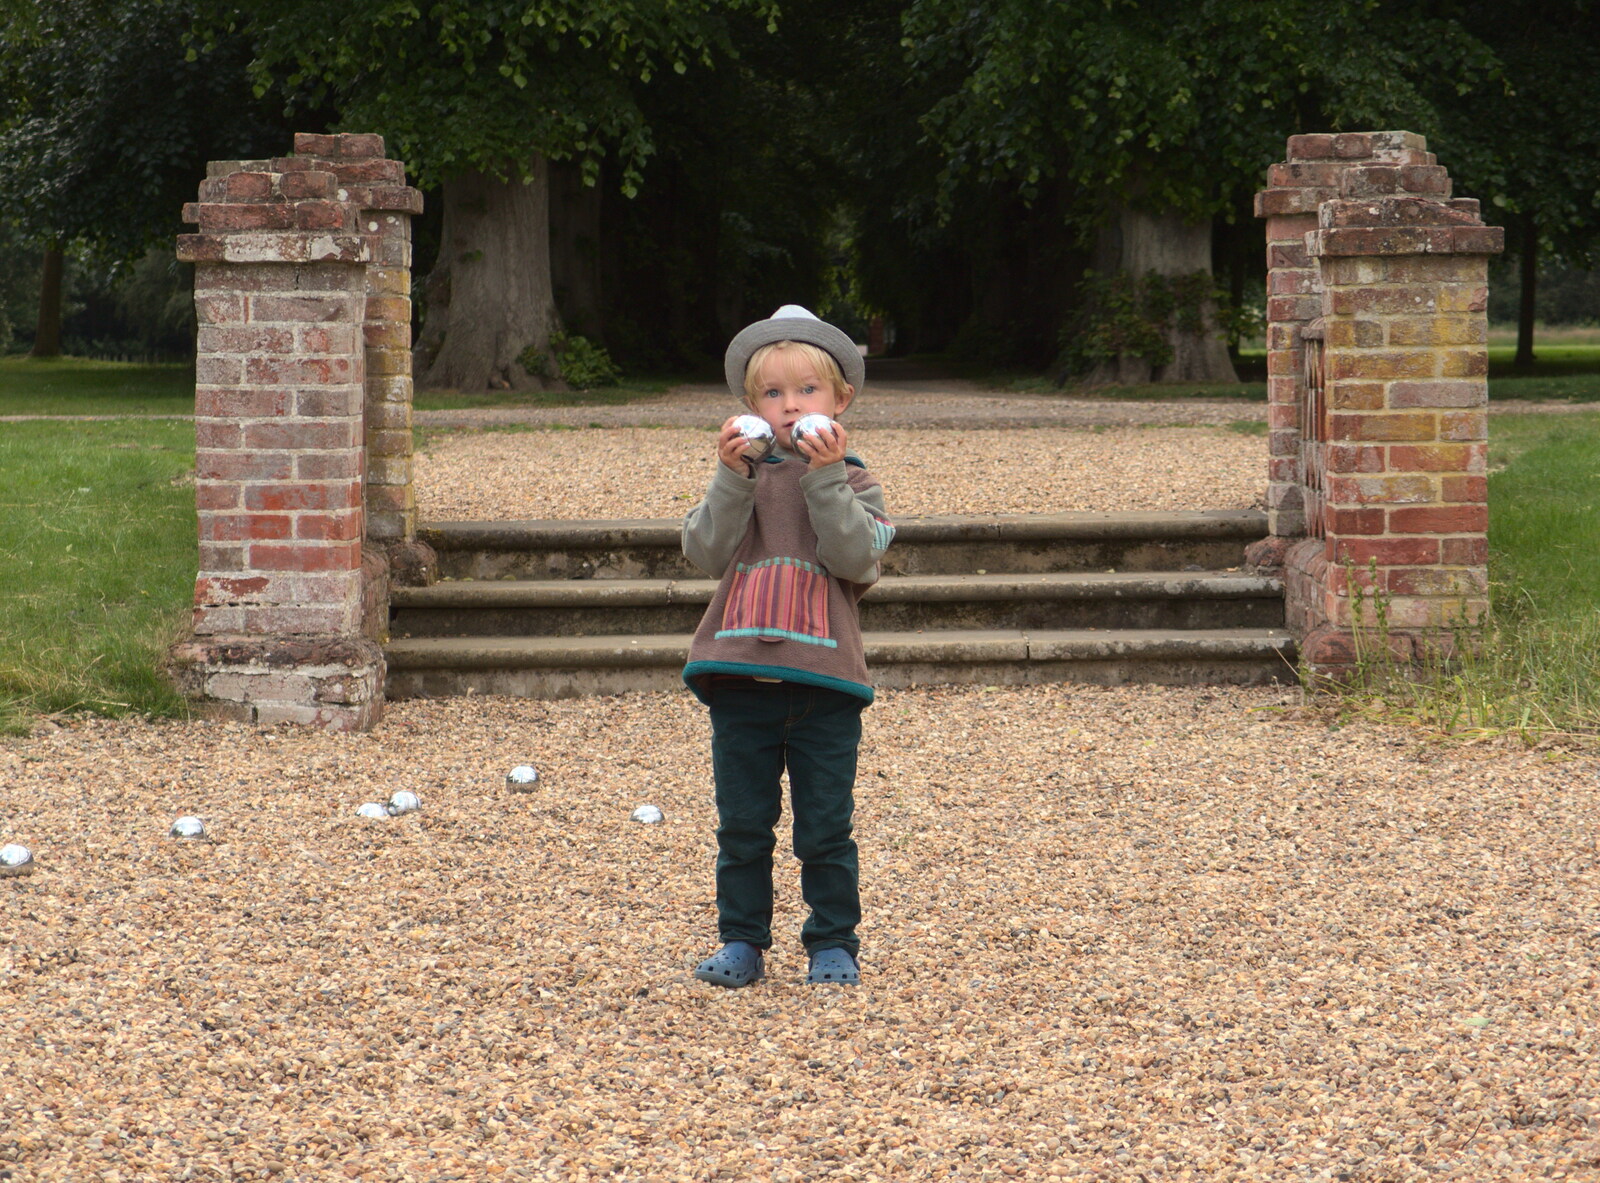 Harry's got boules of steel from A Vintage Tractorey Sort of Day, Palgrave, Suffolk - 21st June 2015